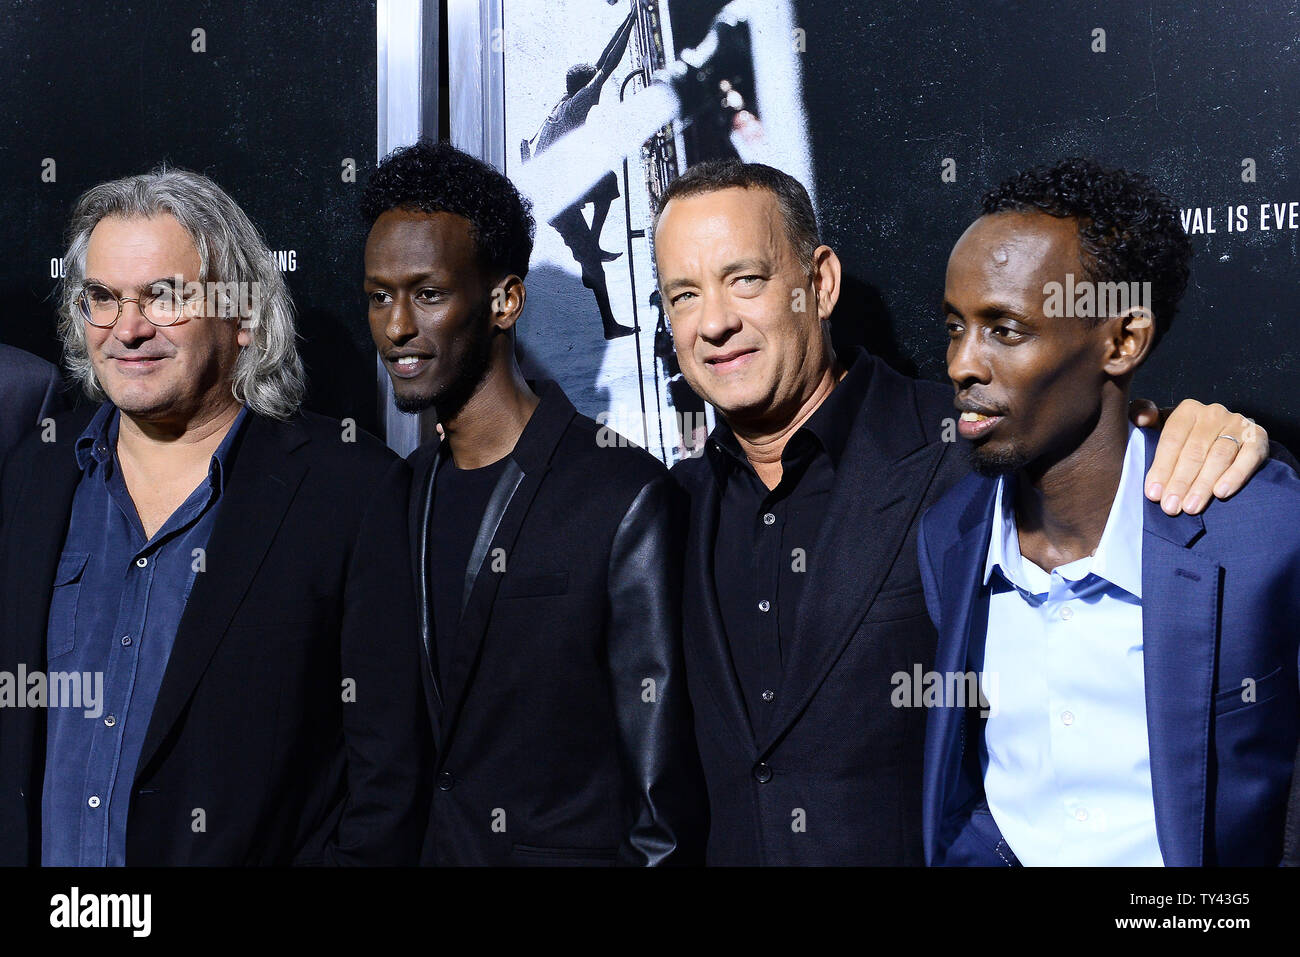 Cast member Tom Hanks with cast members attends the premiere of the  biographical motion picture thriller "Captain Phillips" at the Academy of  Motion Picture Arts & Sciences in Beverly Hills, California on